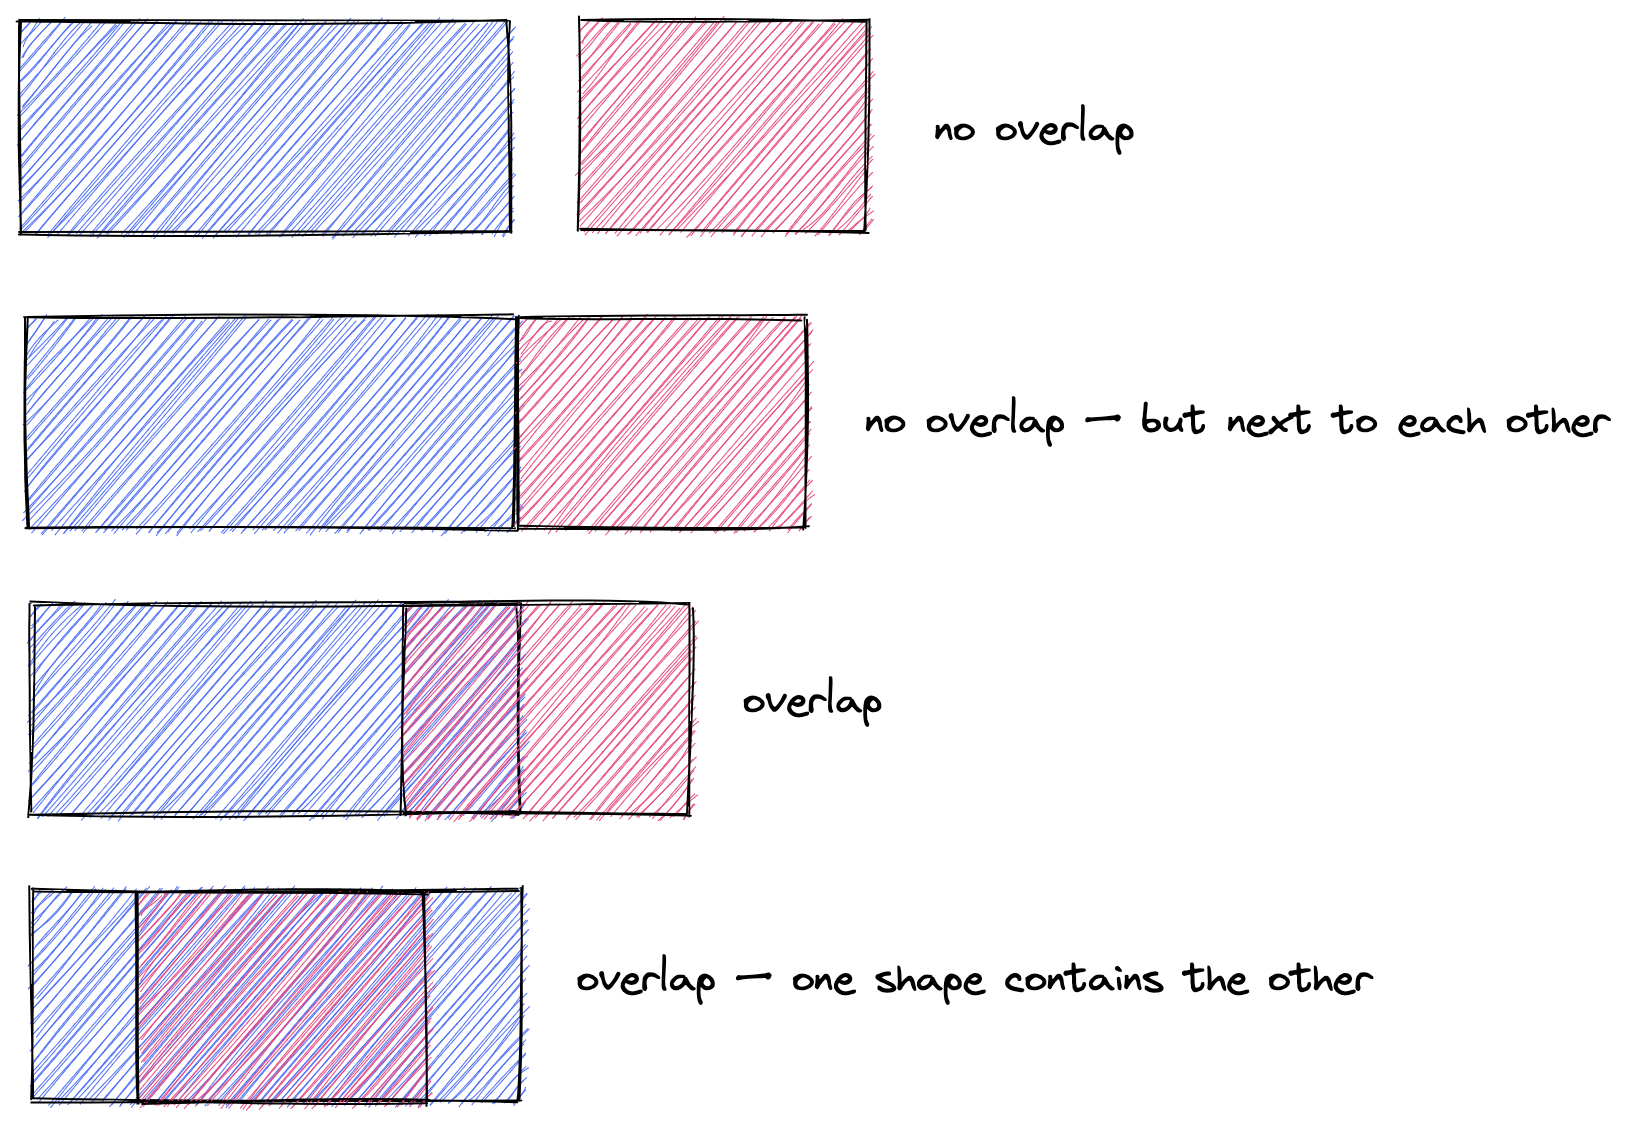 examples of overlap with rectangles